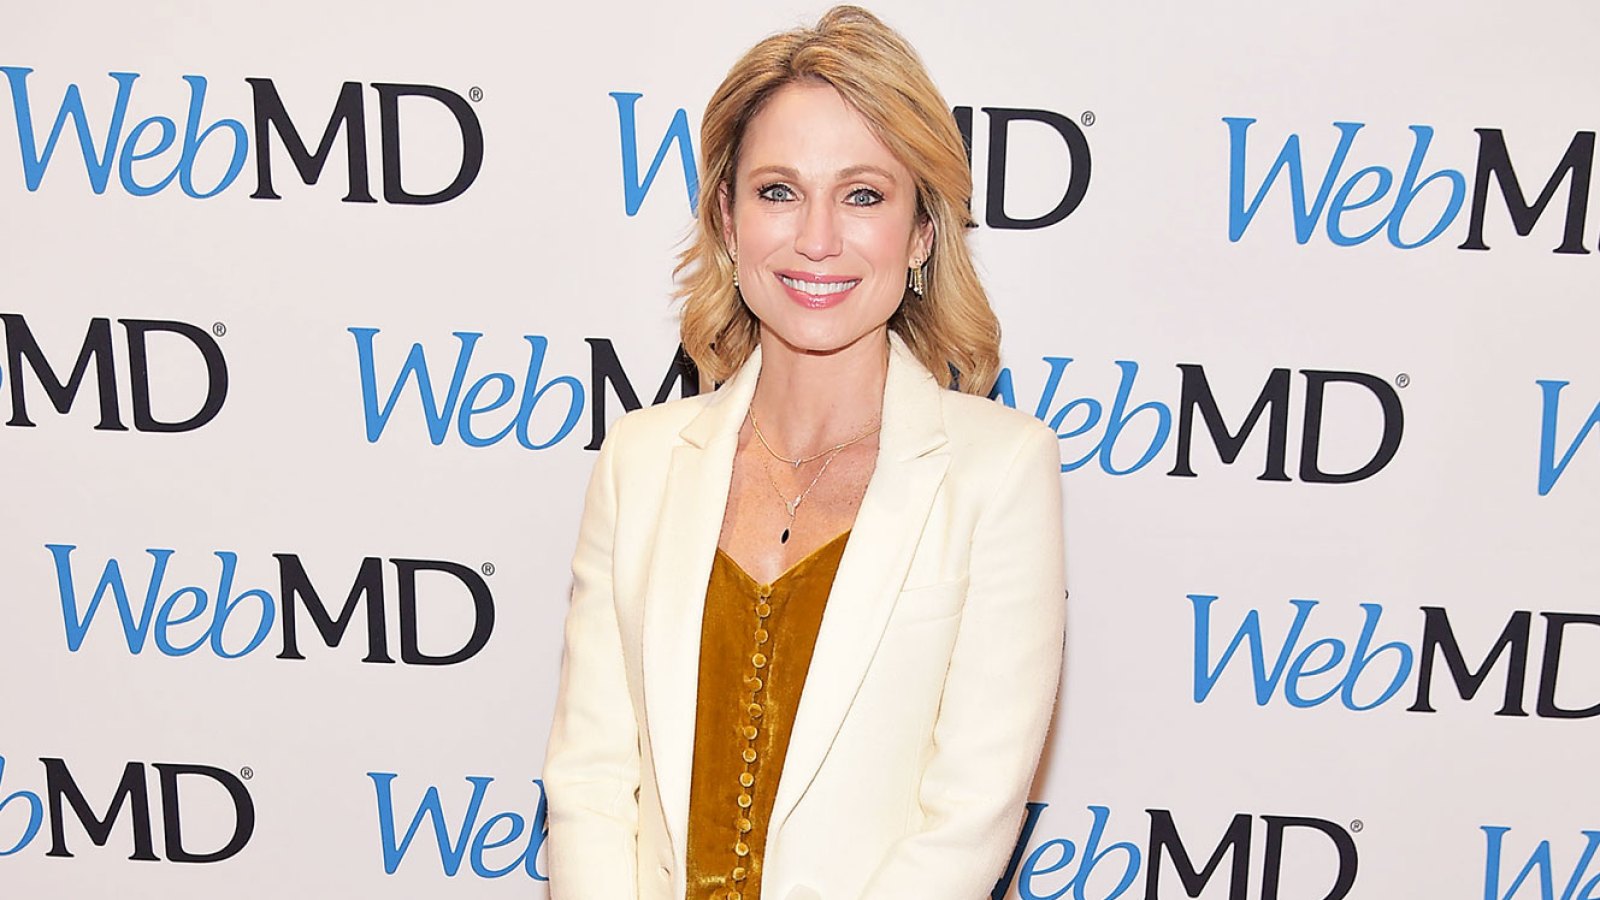 Amy Robach on Life After Cancer: 'I Have a Lot More Living to Do'